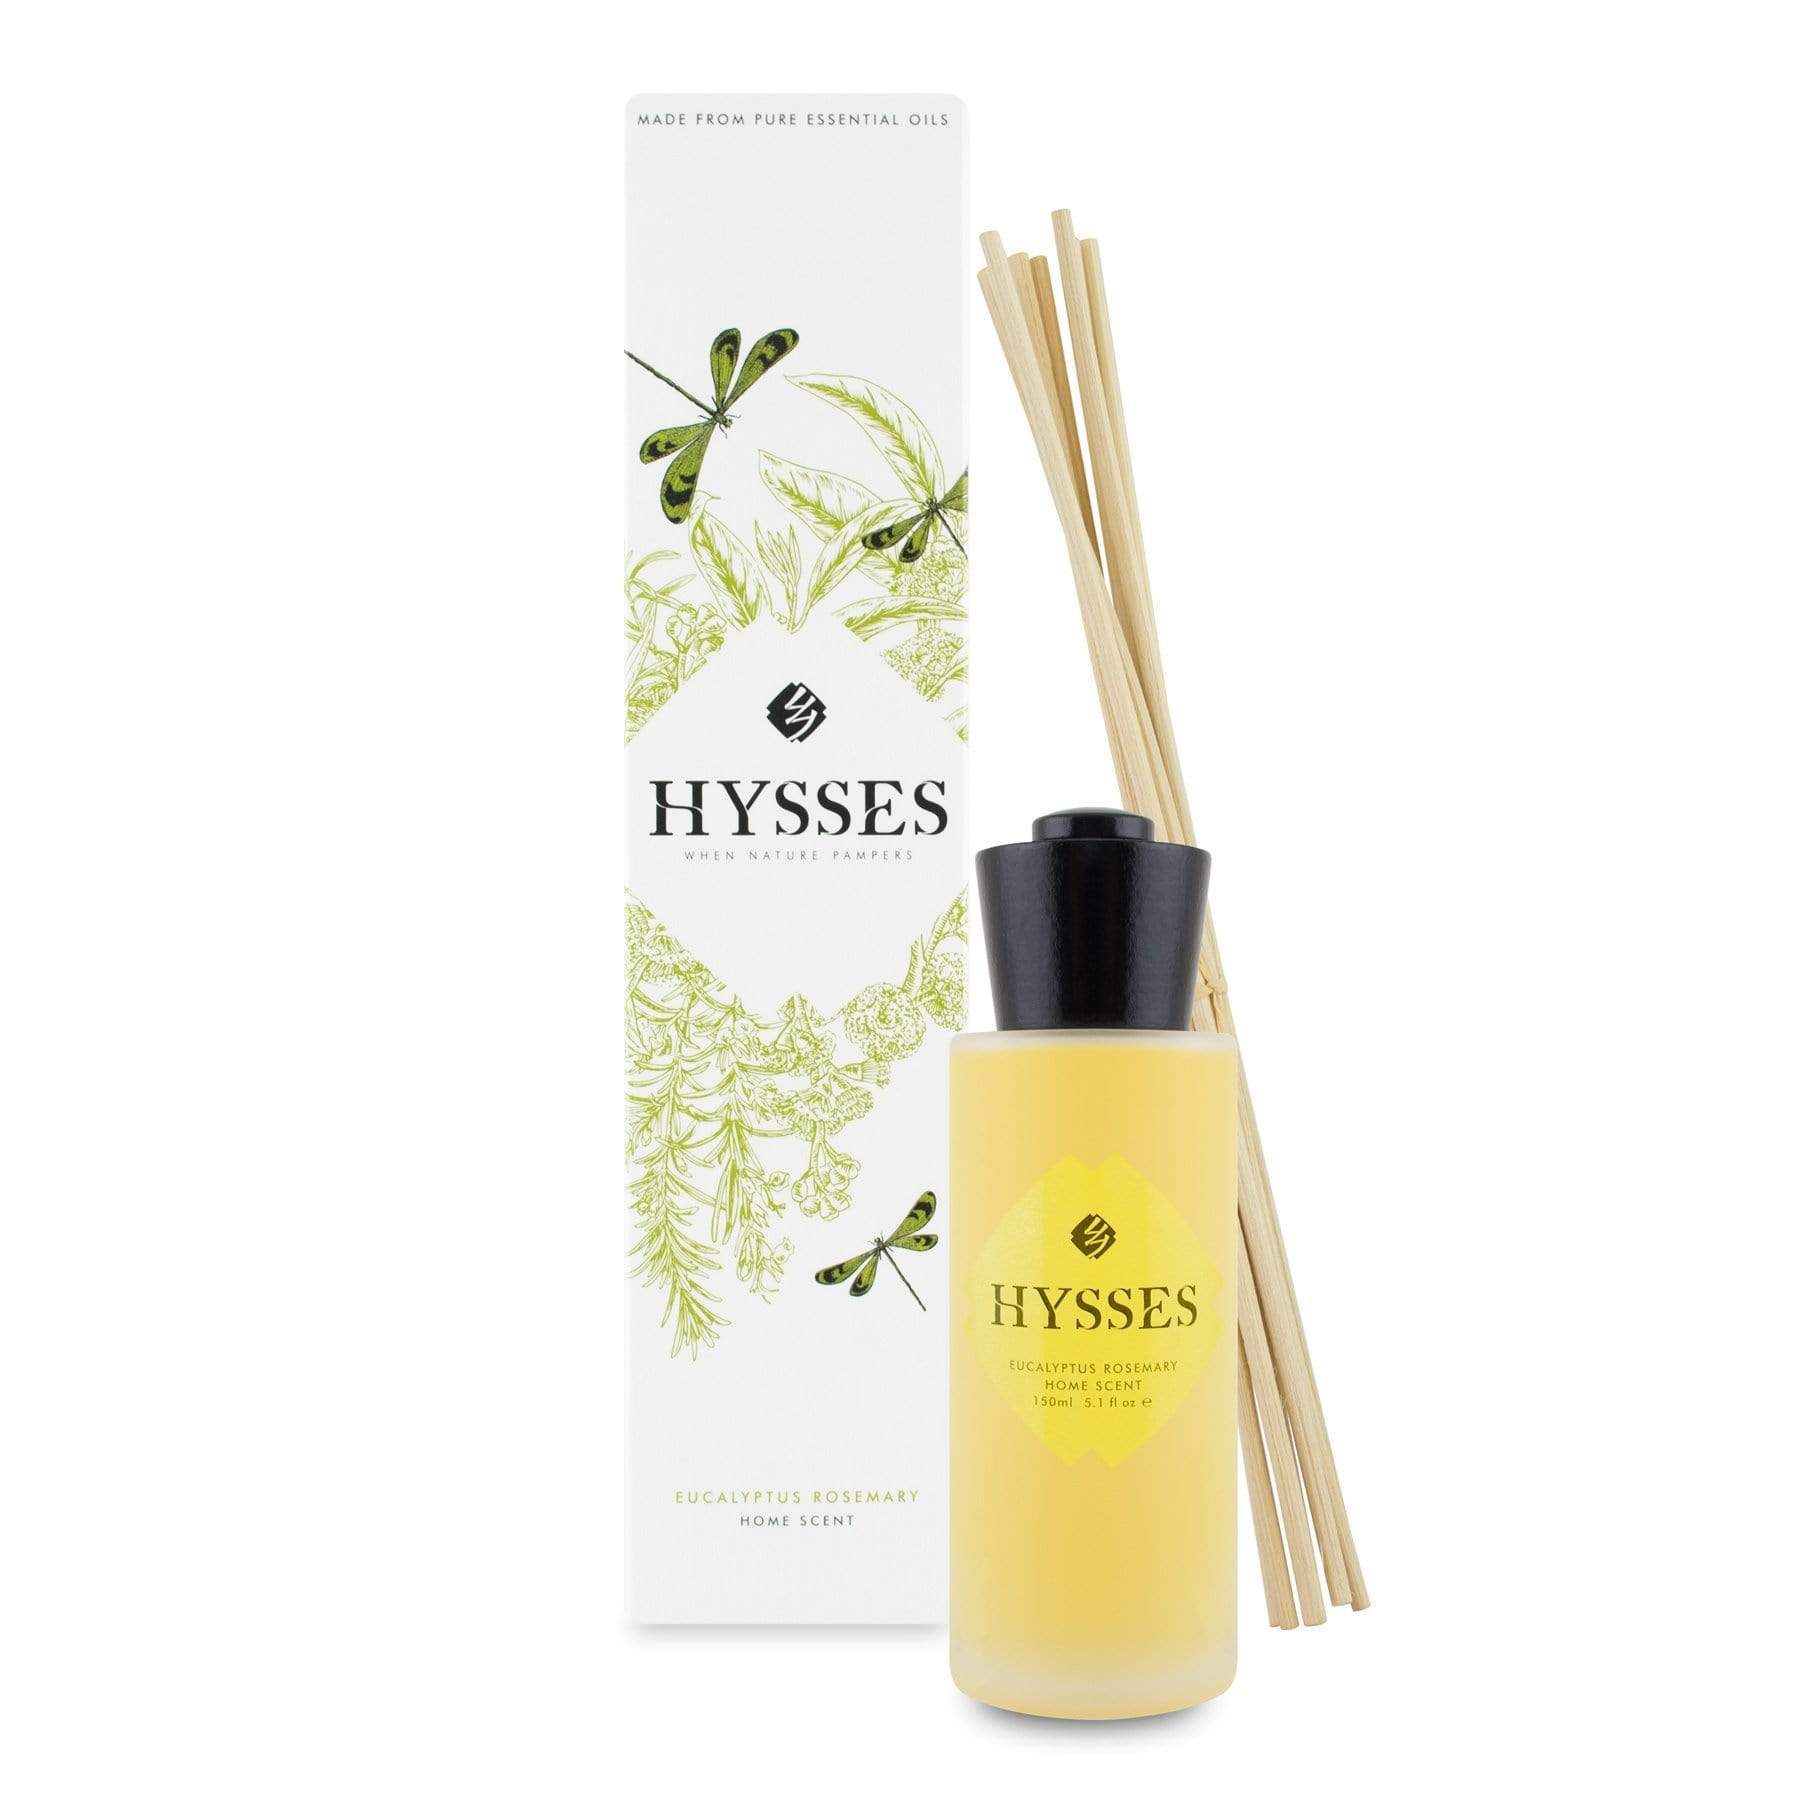 Hysses Home Scents 60ml Home Scent Reed Diffuser Eucalyptus Rosemary